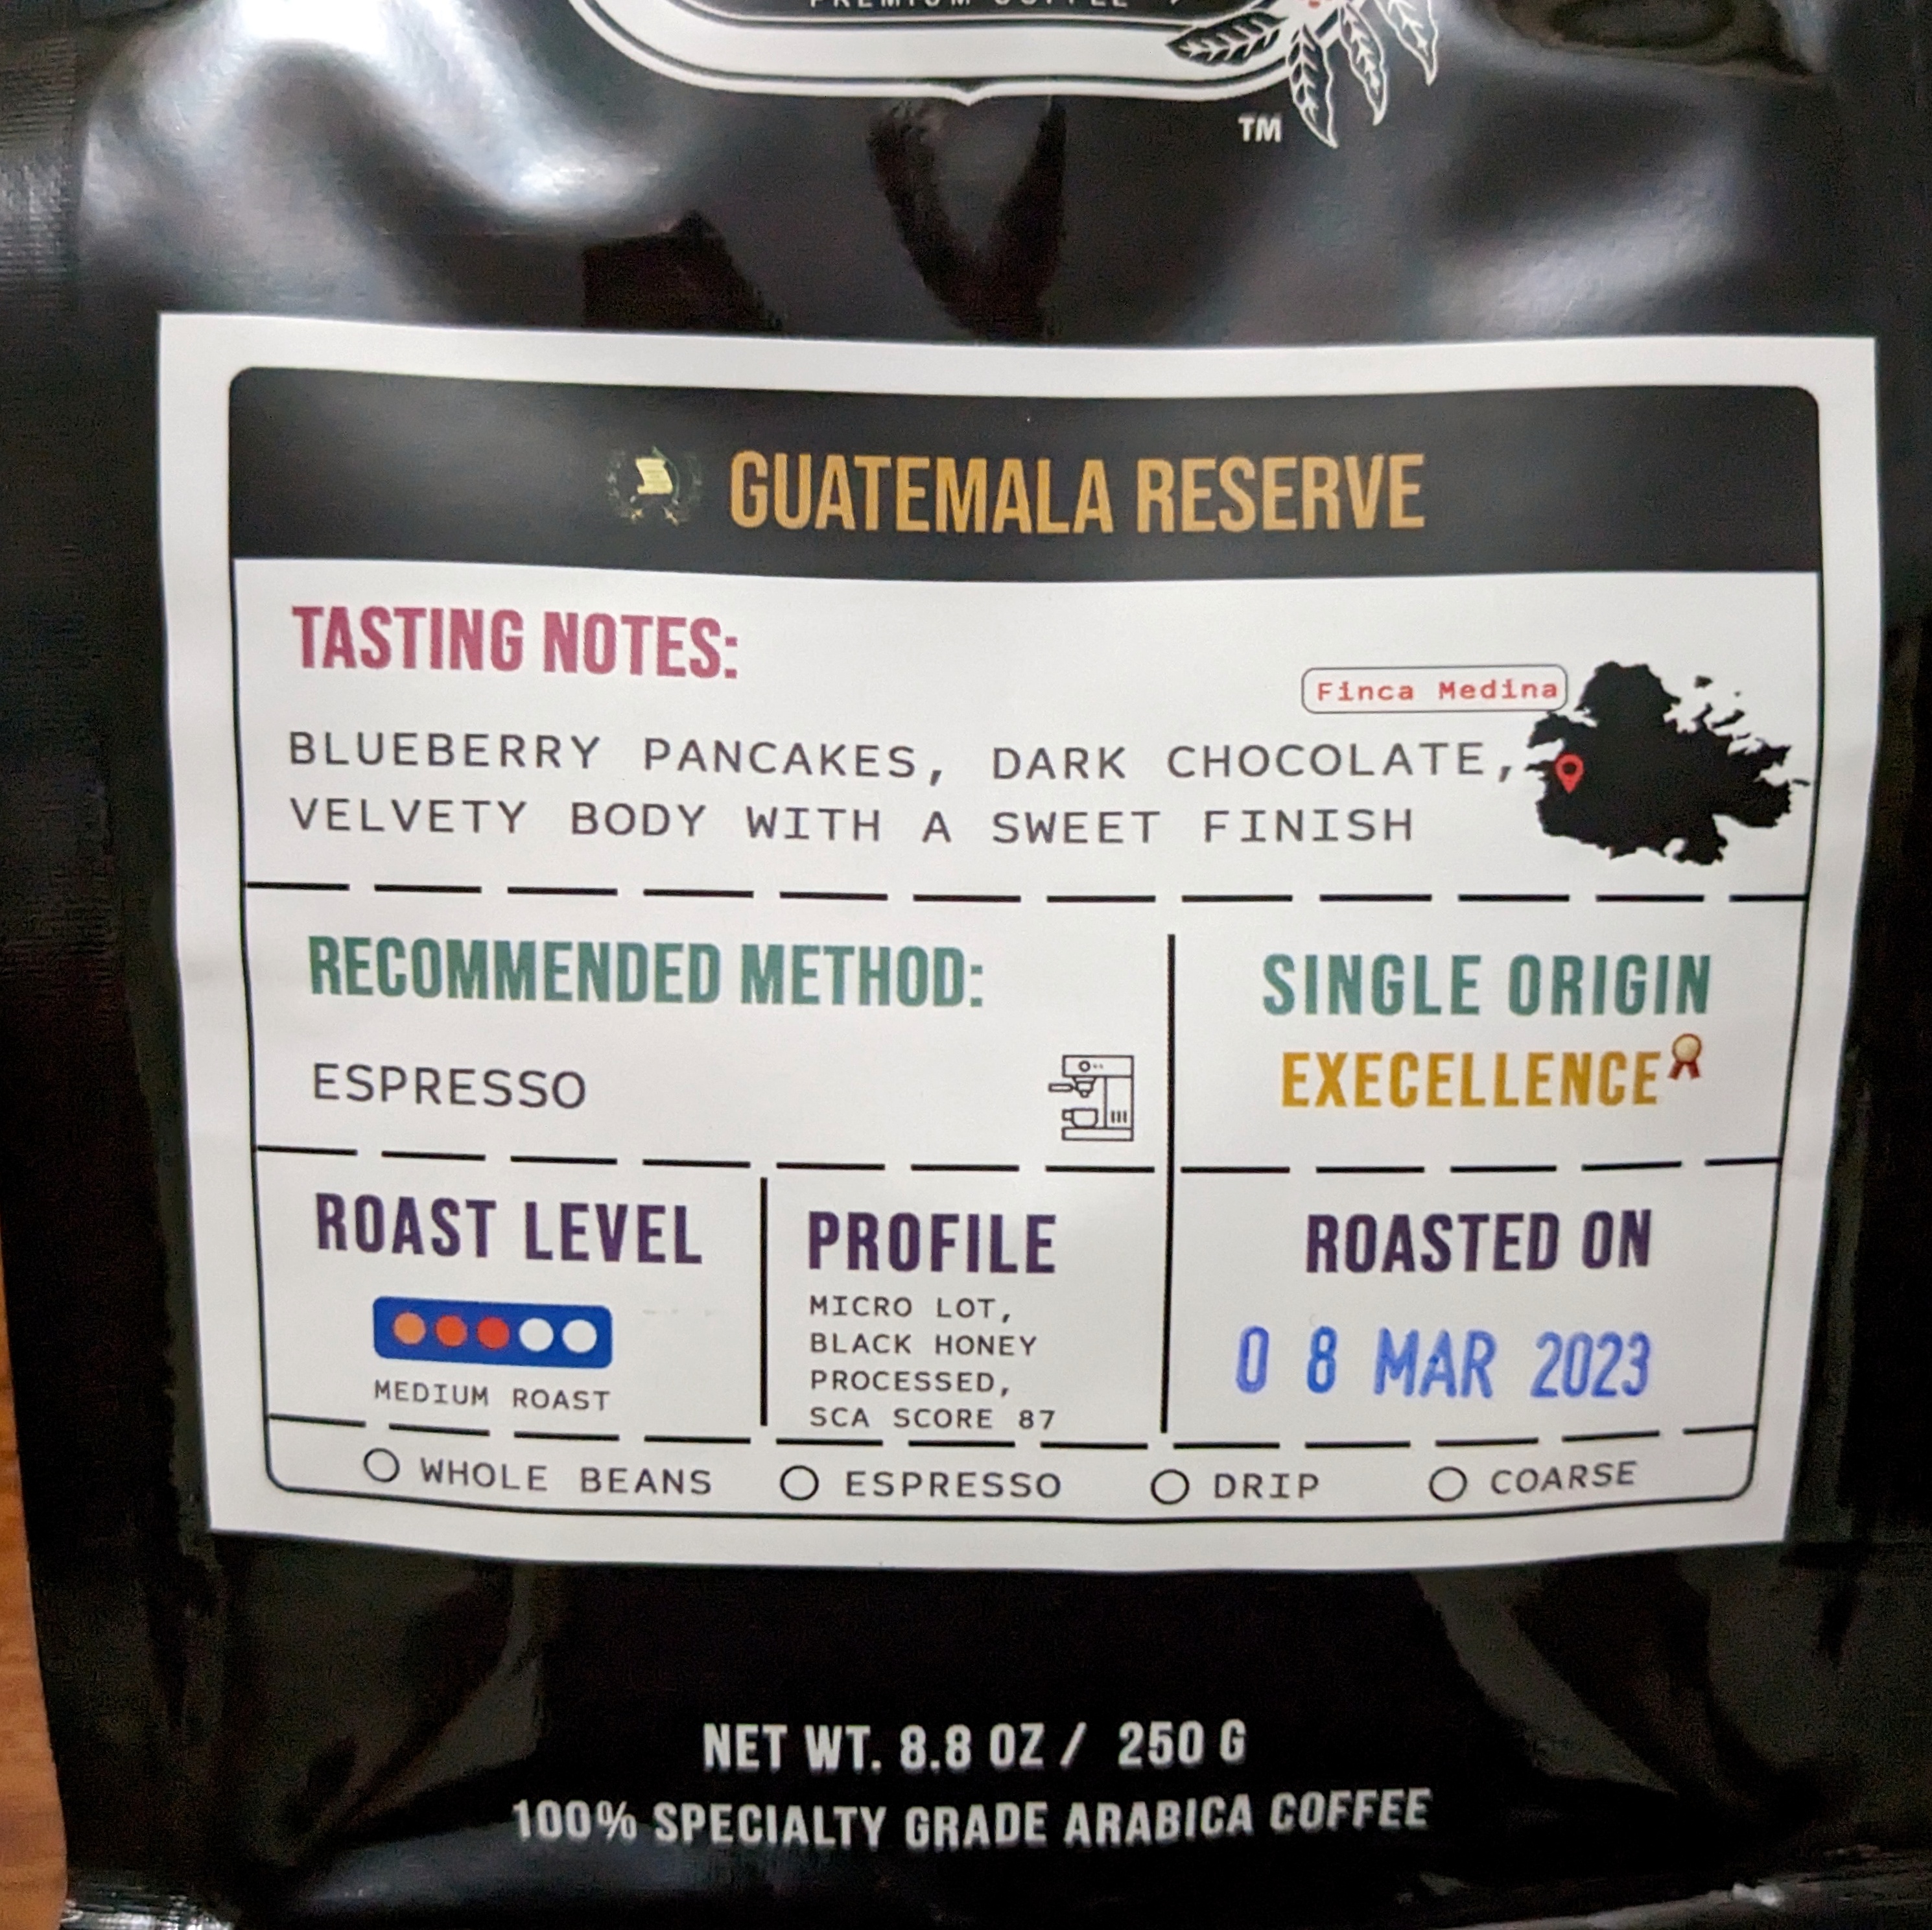 bag of coffee beans from guatemala. taste described as: blueberry pancakes, dark chocolate, velvety body with a sweet finish. 